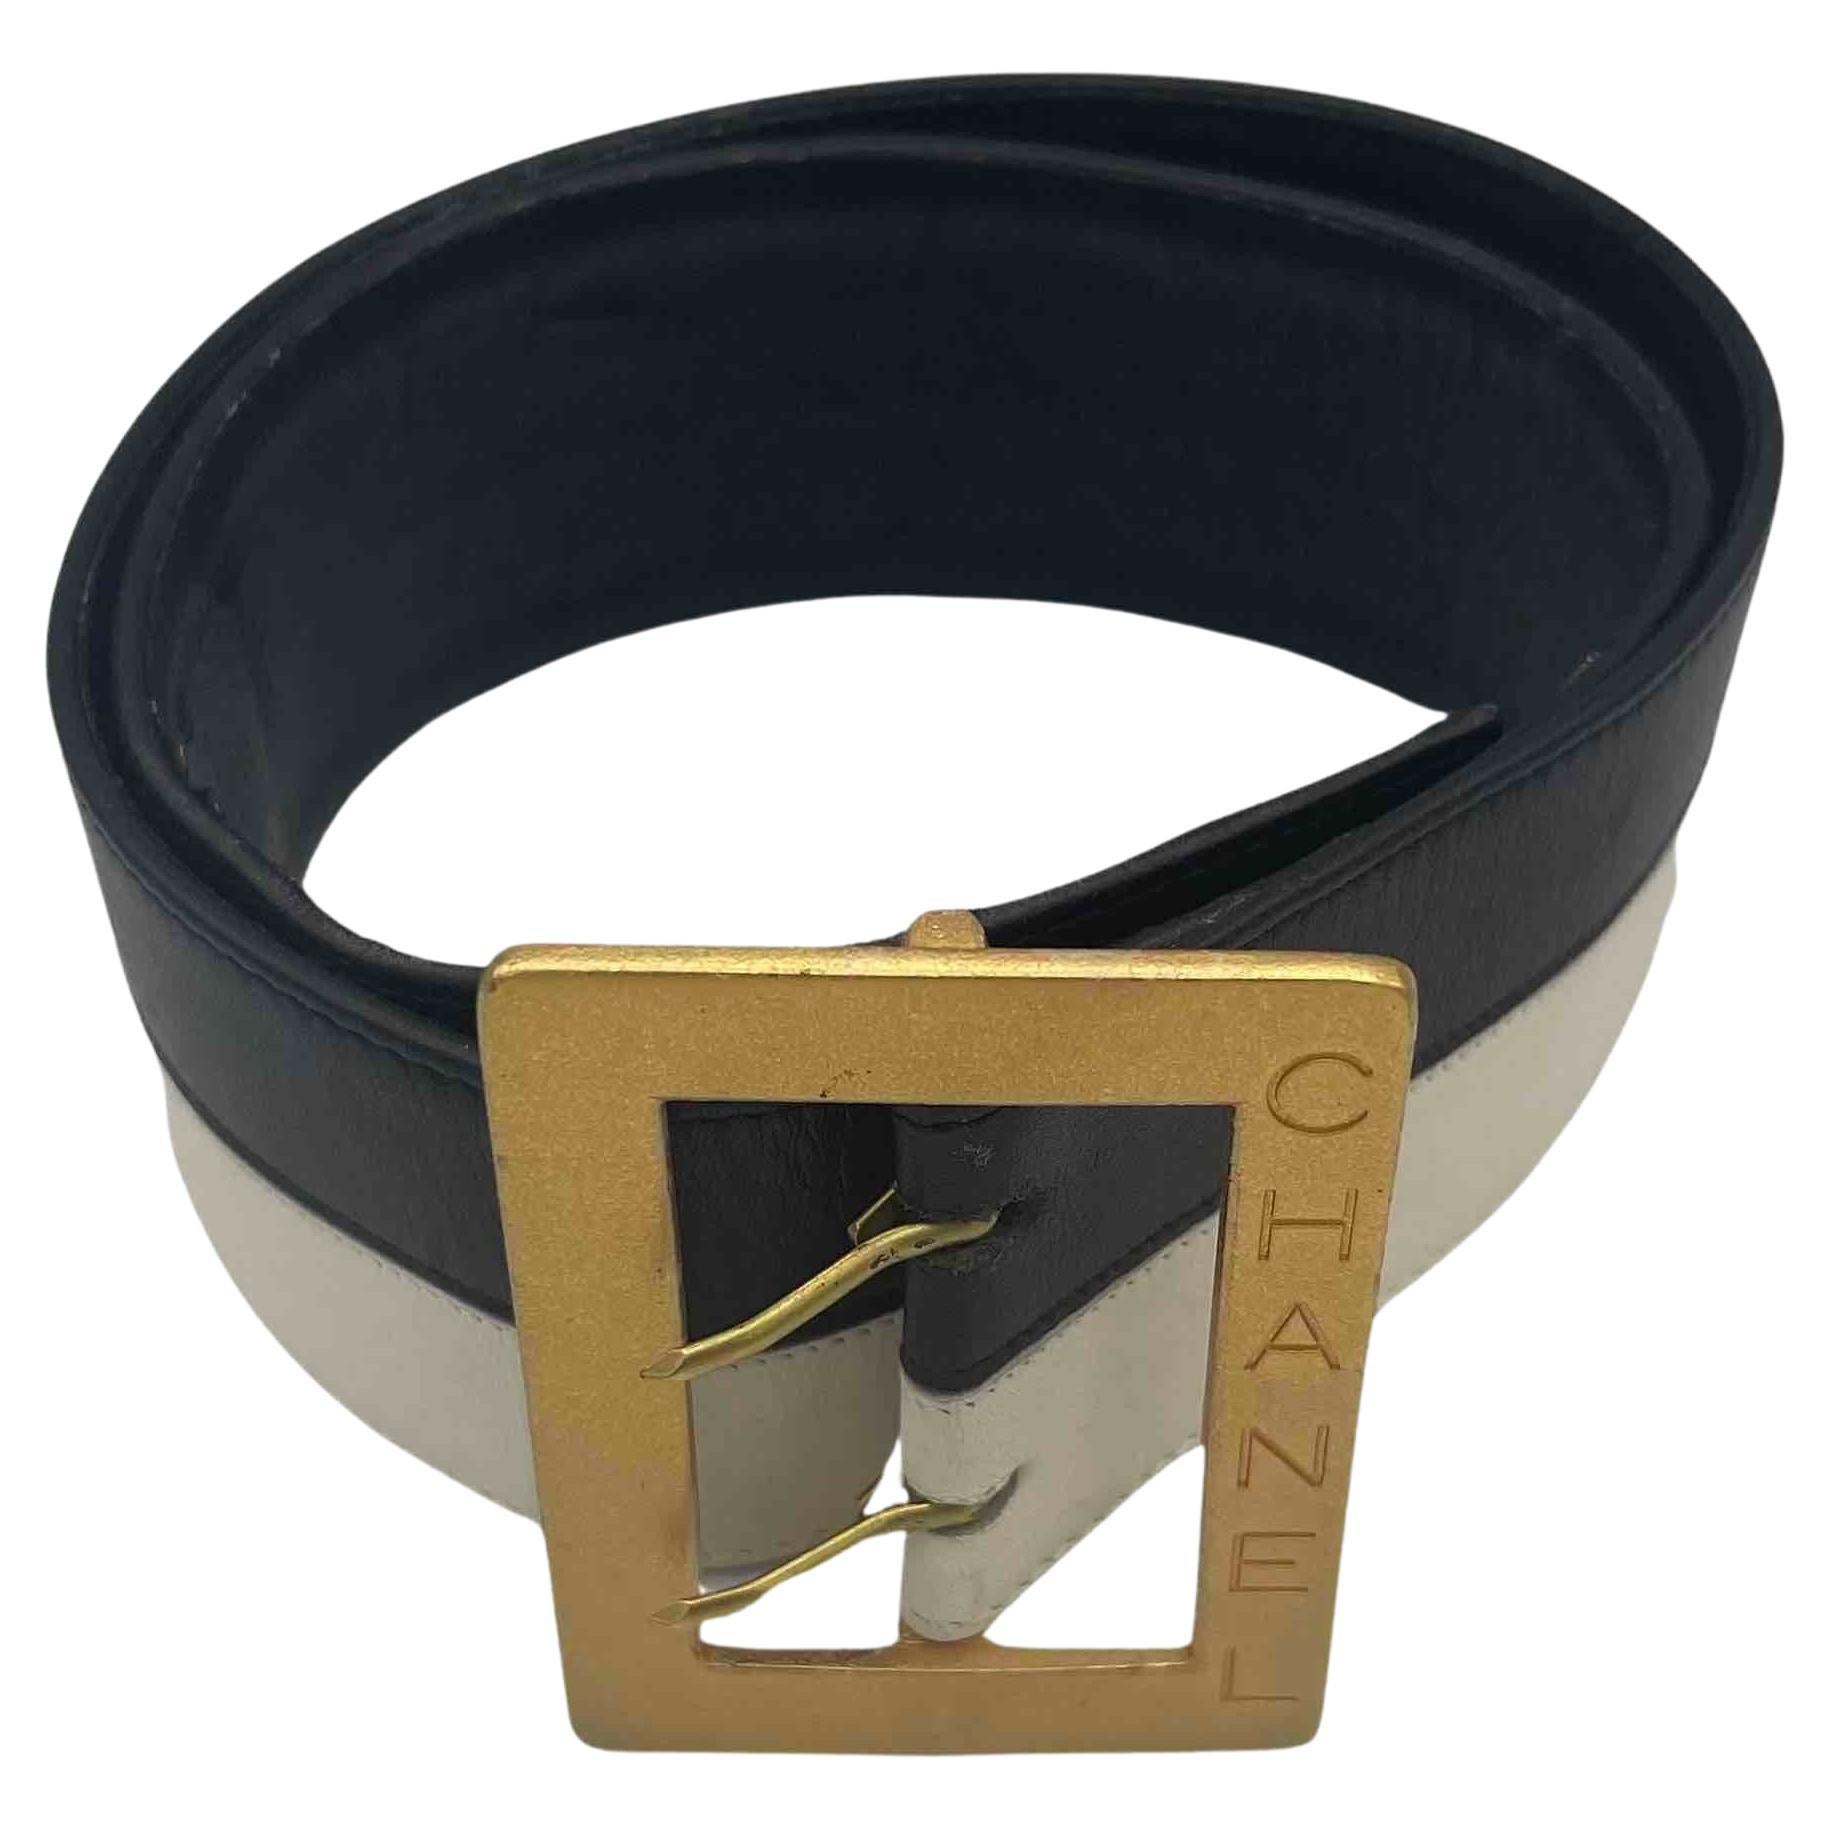 Chanel Black Leather Belt With Silver Logo Buckle  Black leather belt, Chanel  belt, Tan leather belt